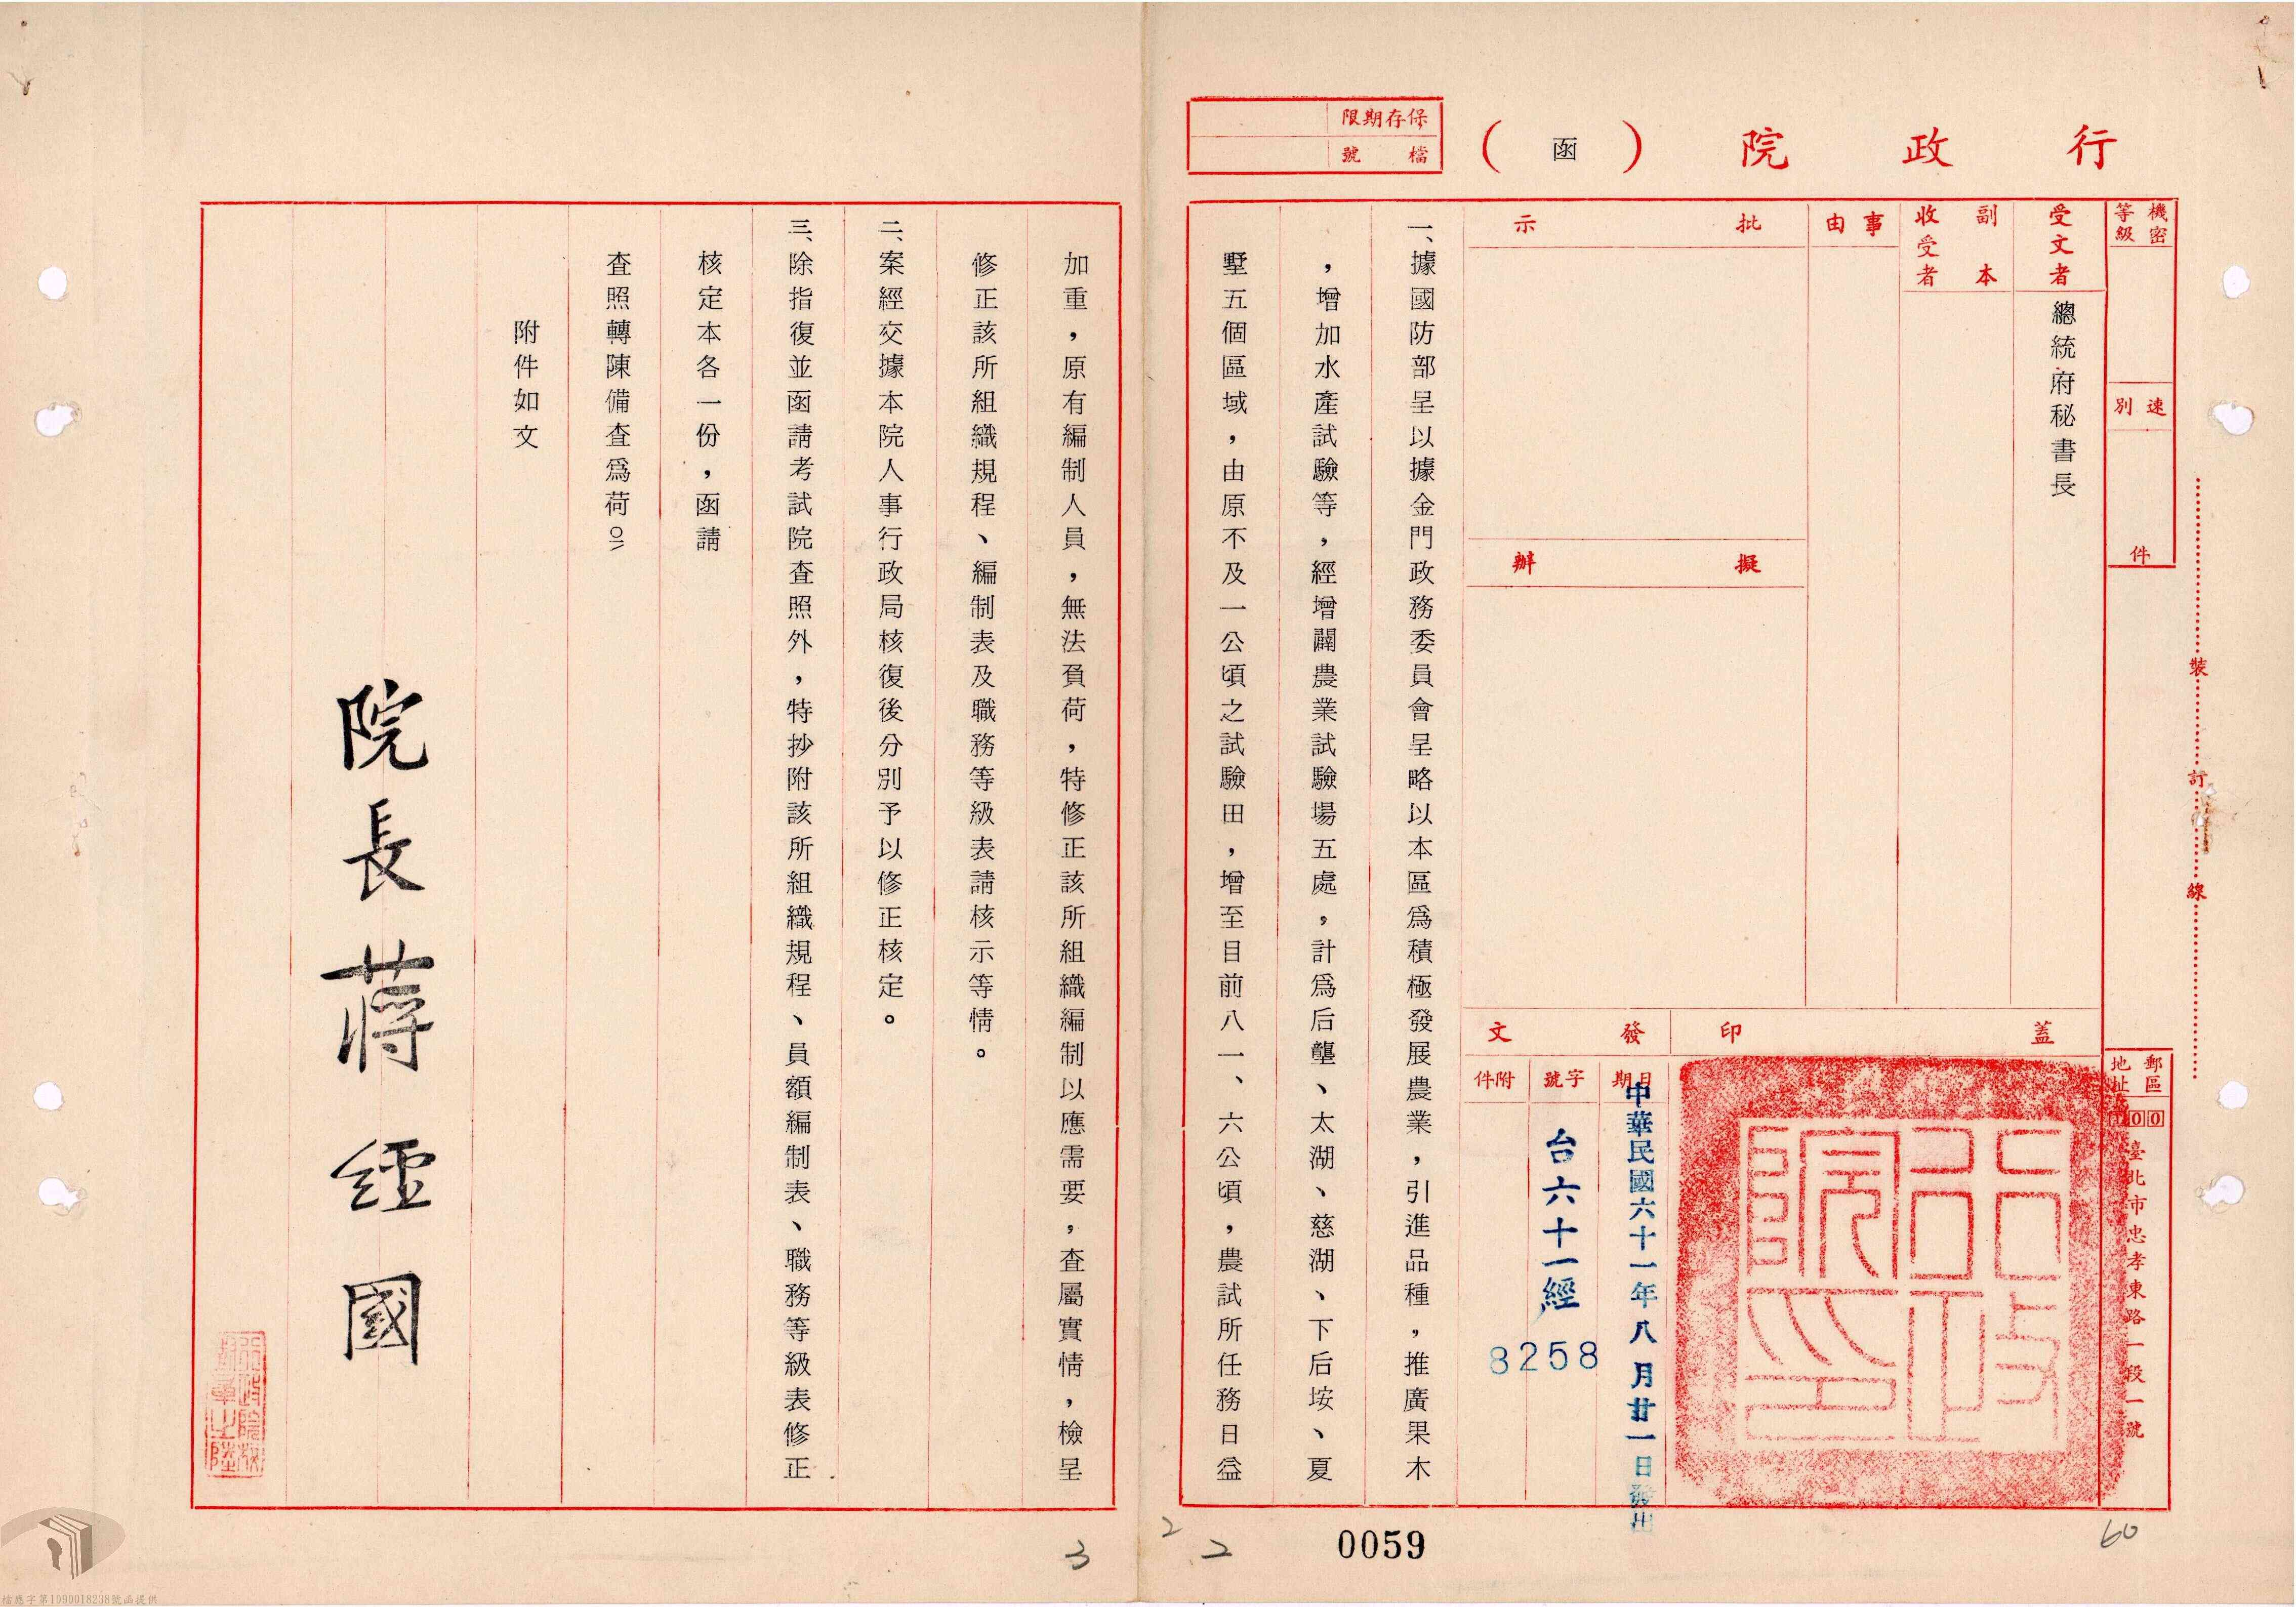 August 1972, Organizational Regulations of the Kinmen County Agricultural Research Institute during the period of military administration.